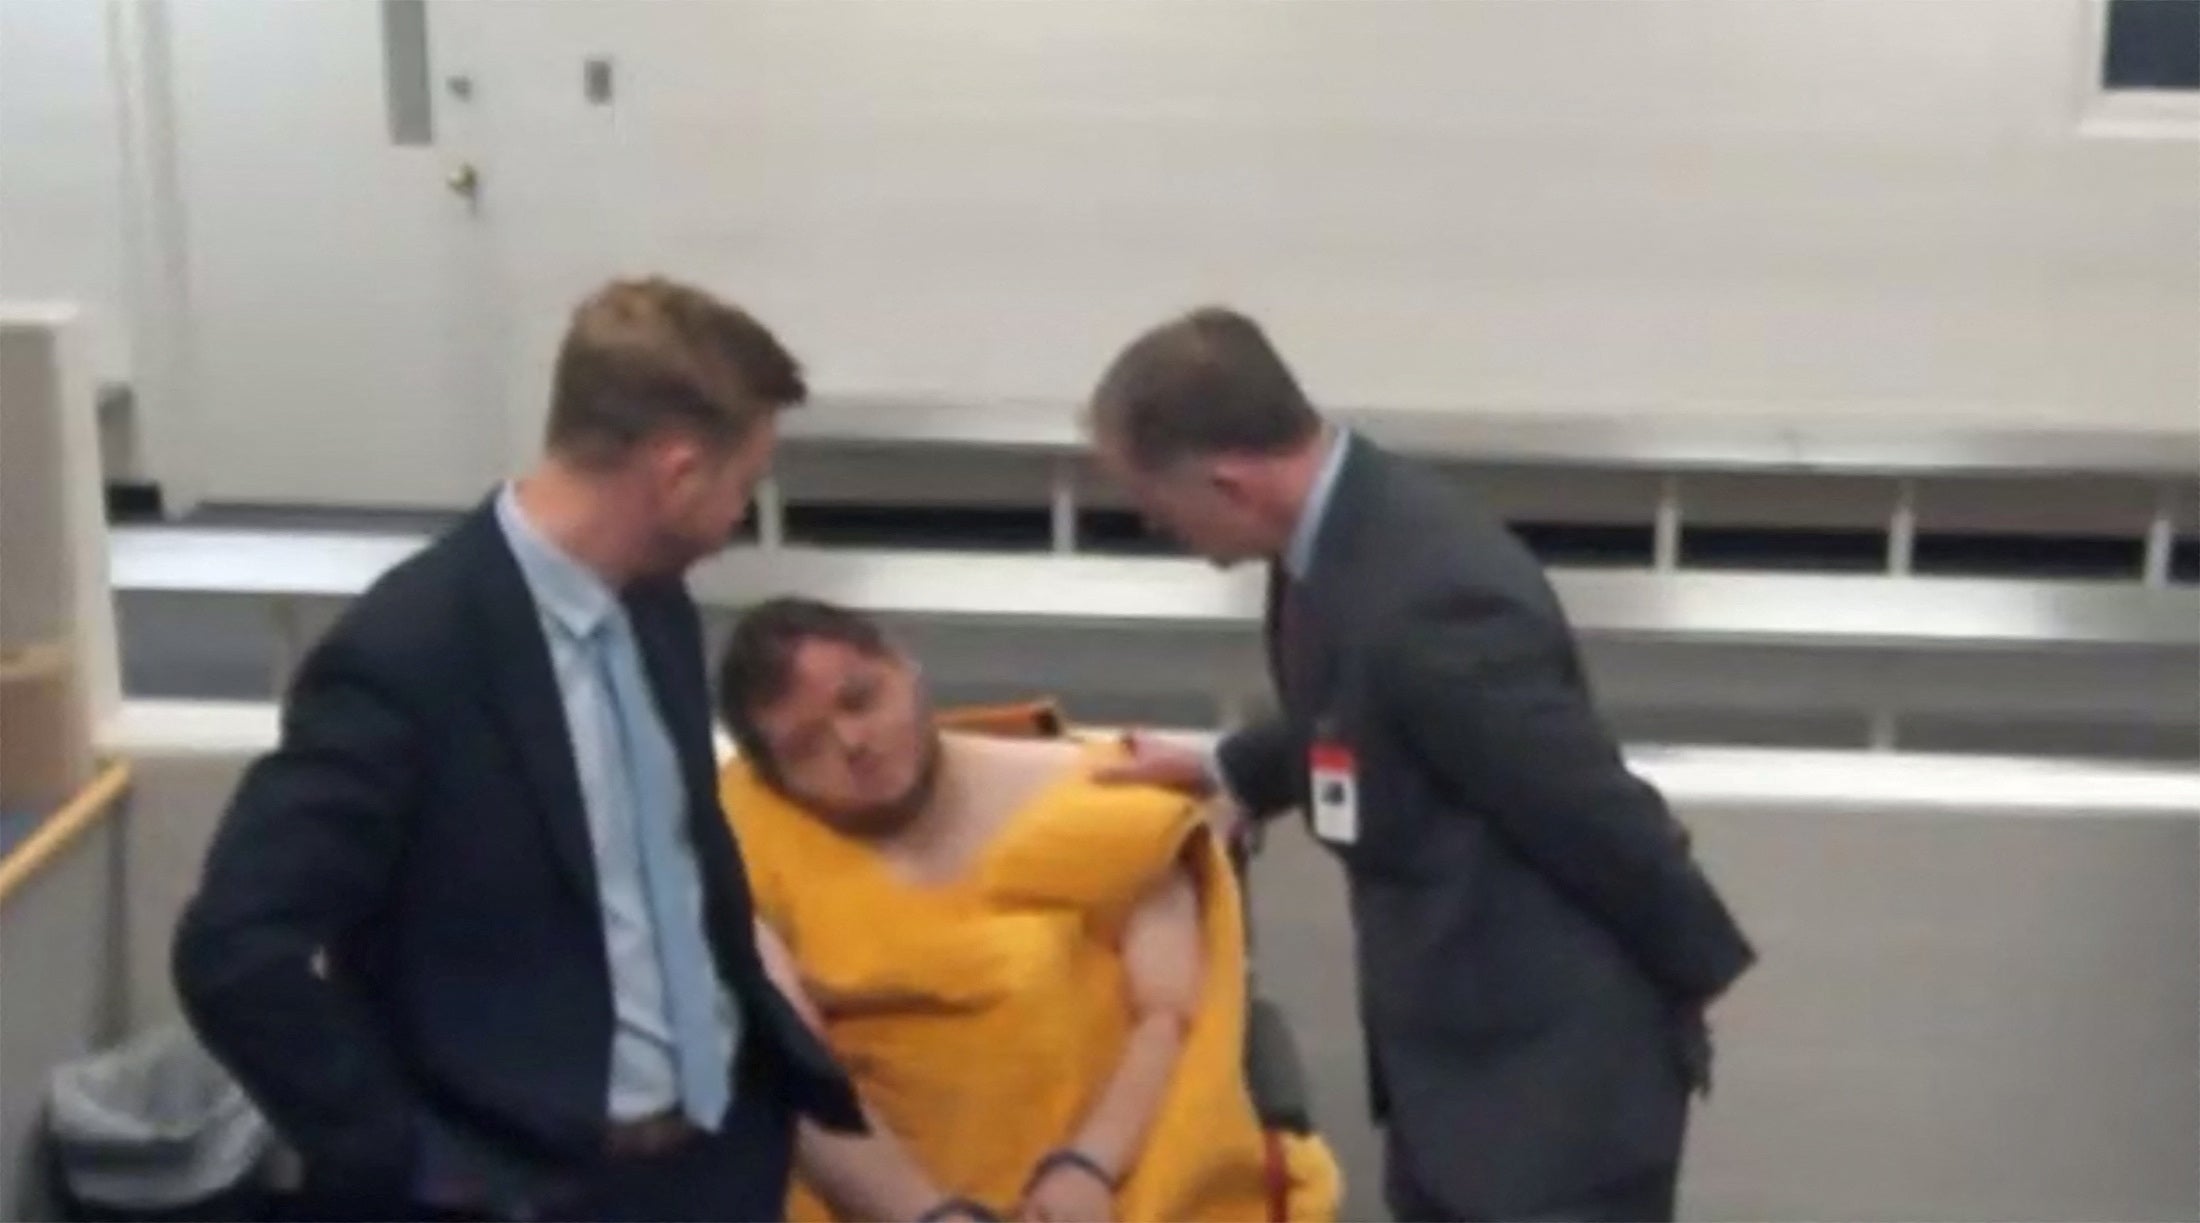 Anderson Lee Aldrich, 22, the suspect in the mass shooting that killed five people and wounded 17 at an LGBTQ nightclub appears with state public defenders Joseph Archambault and Michael Bowman before a judge during their advisement hearing in a video link from jail, slumped to the side and in a wheelchair and showing facial injuries in a still image from video in Colorado Springs, Colorado